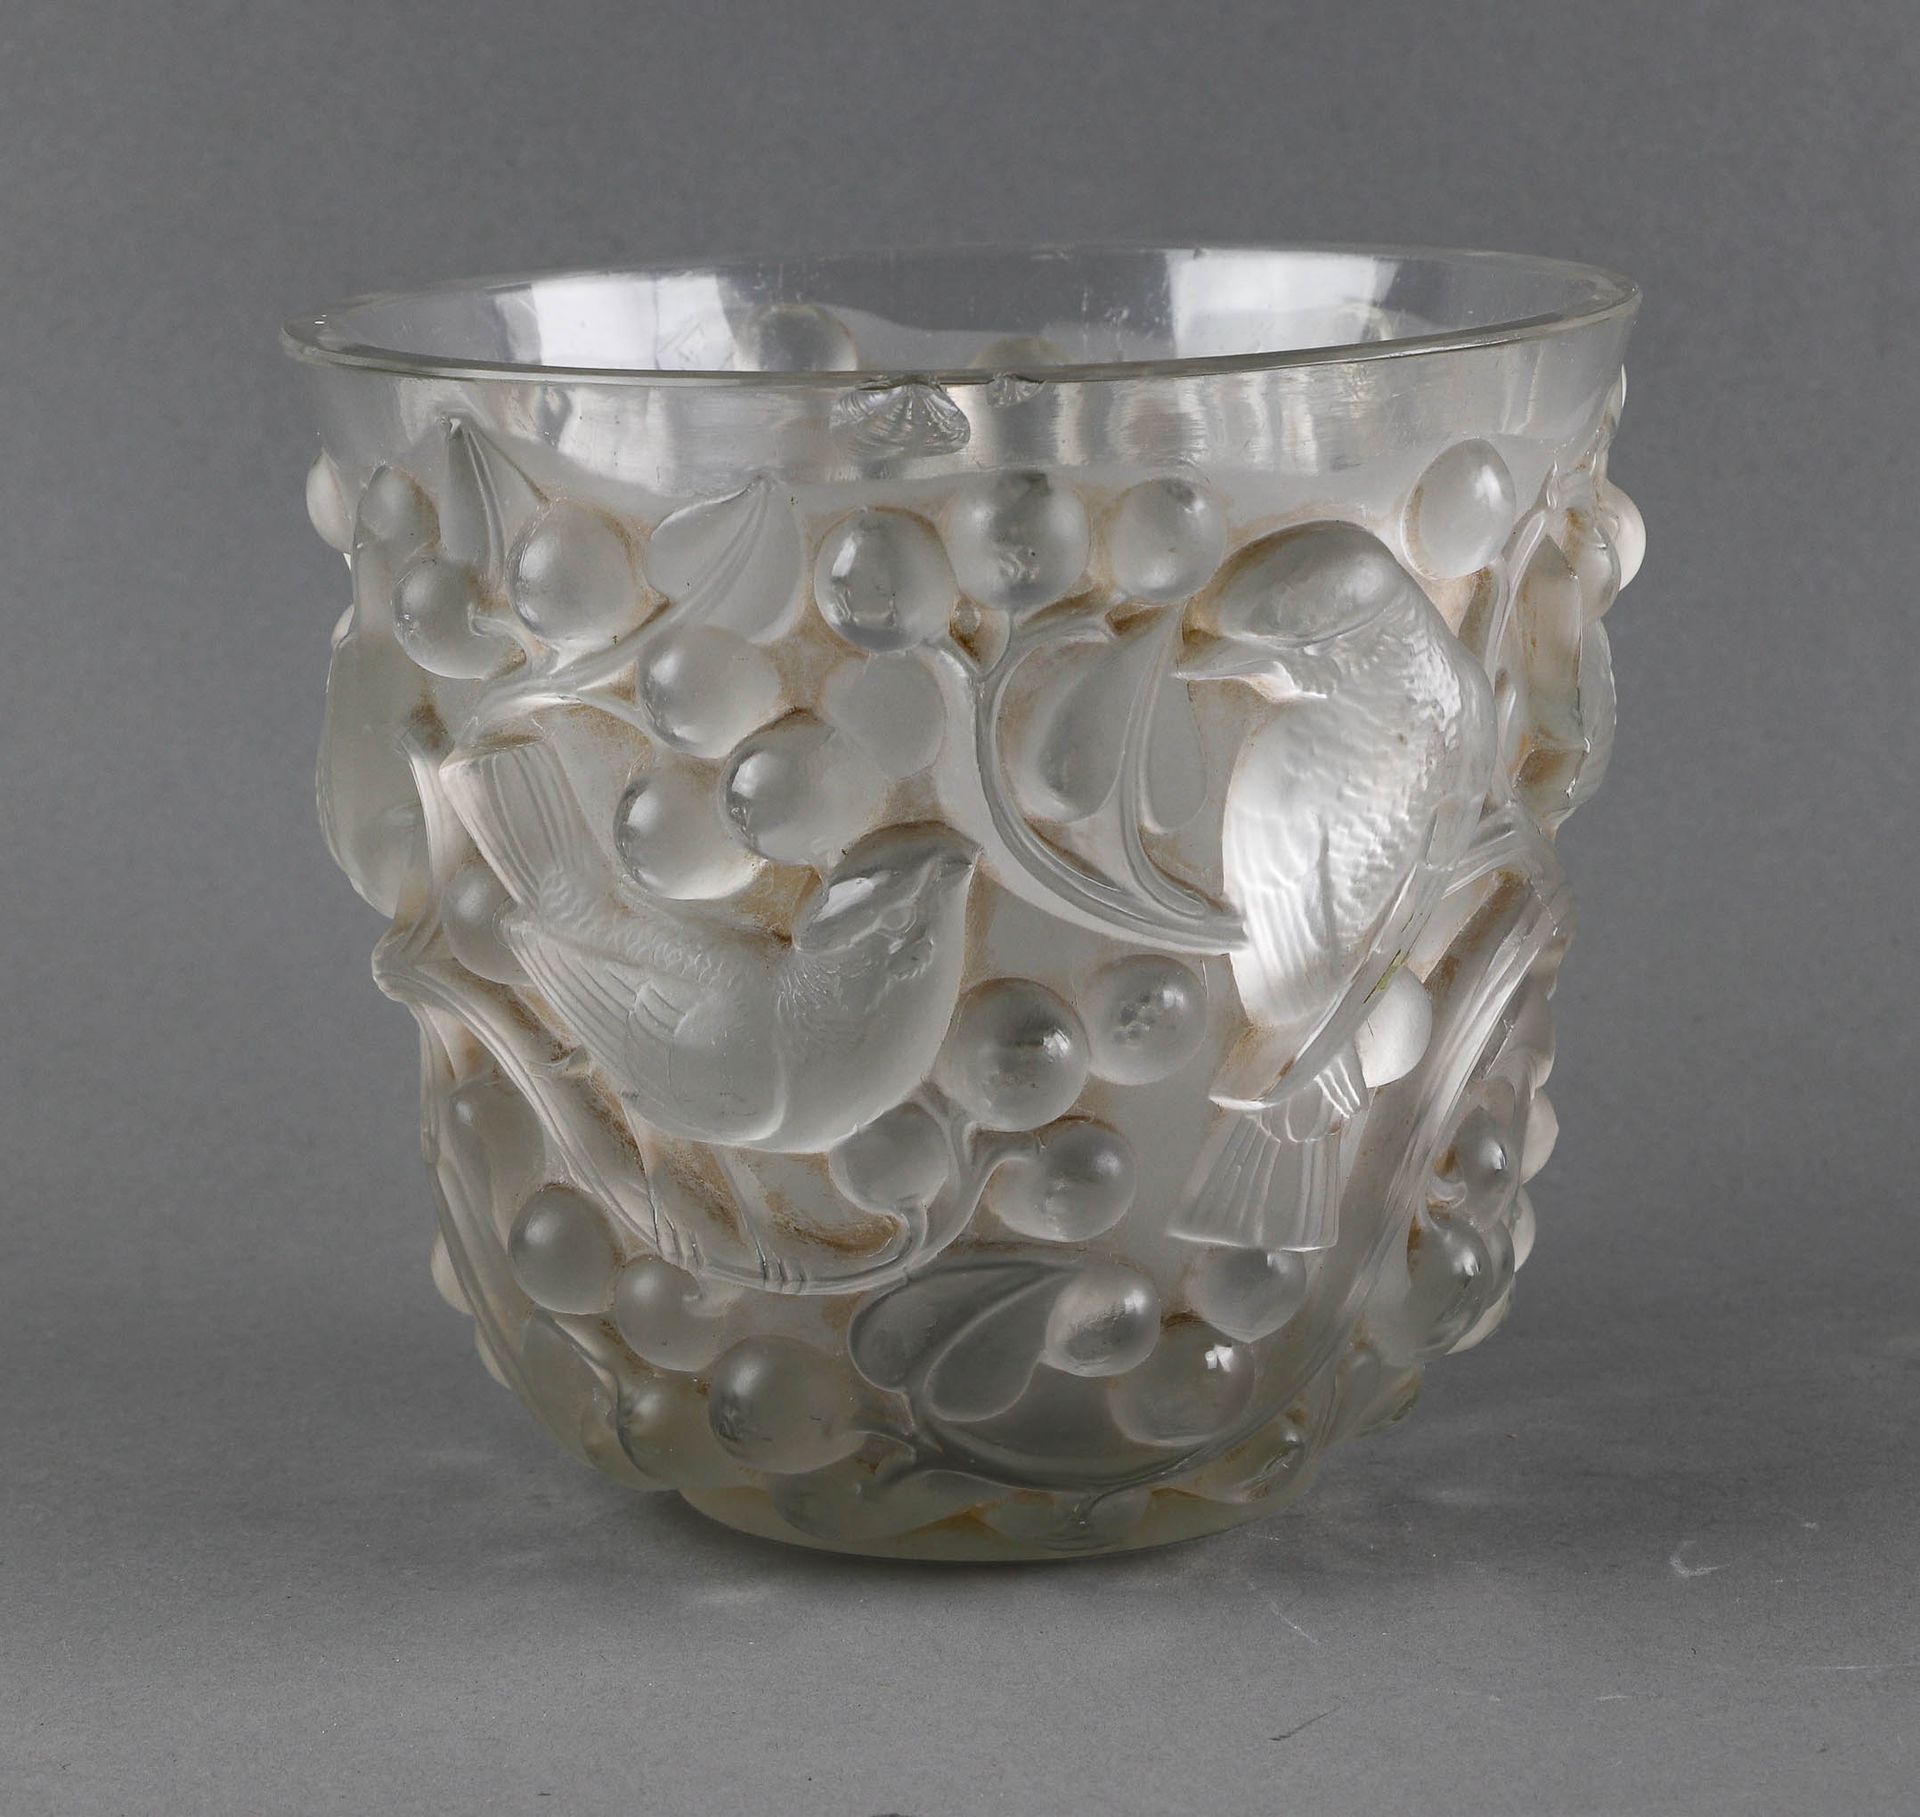 Null R. LALIQUE France - "Avallon" Vase - Model created in 1927 - Opalescent sat&hellip;